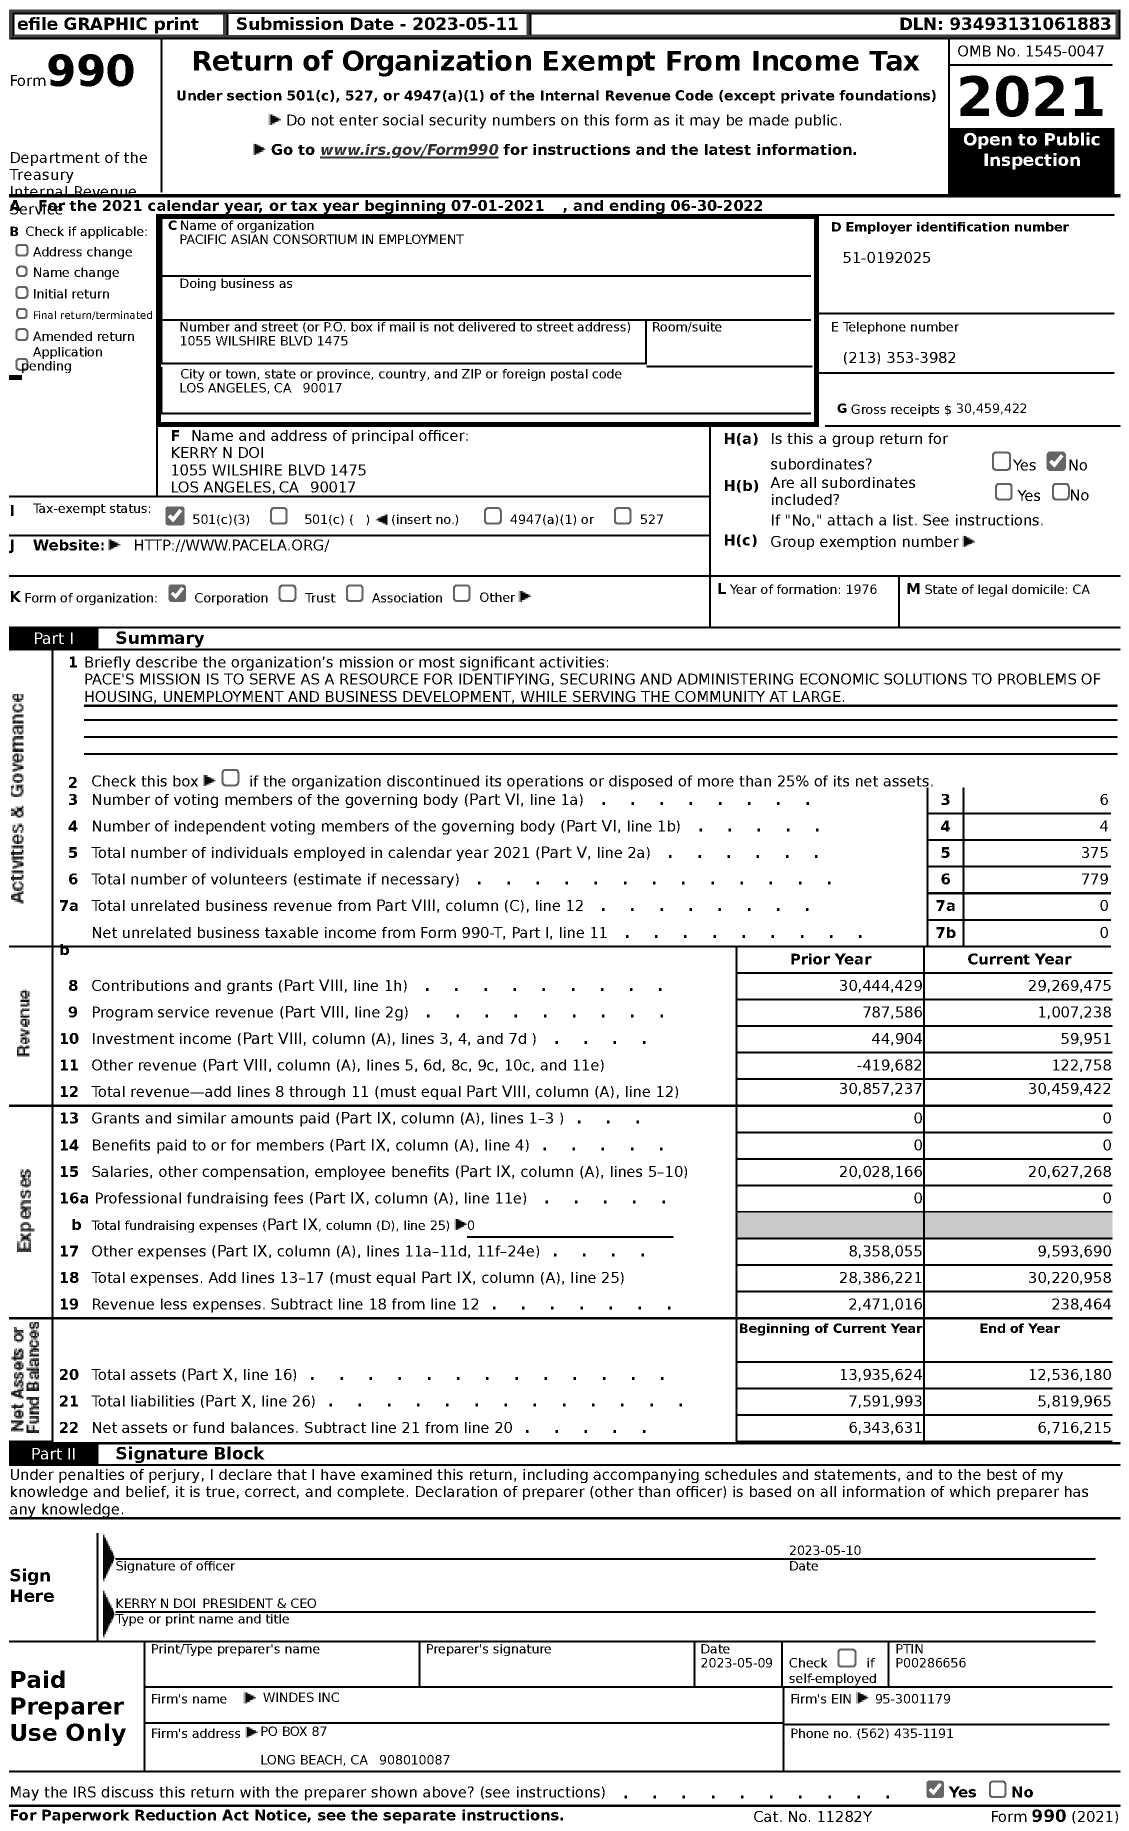 Image of first page of 2021 Form 990 for Pacific Asian Consortium in Employment (PACE)